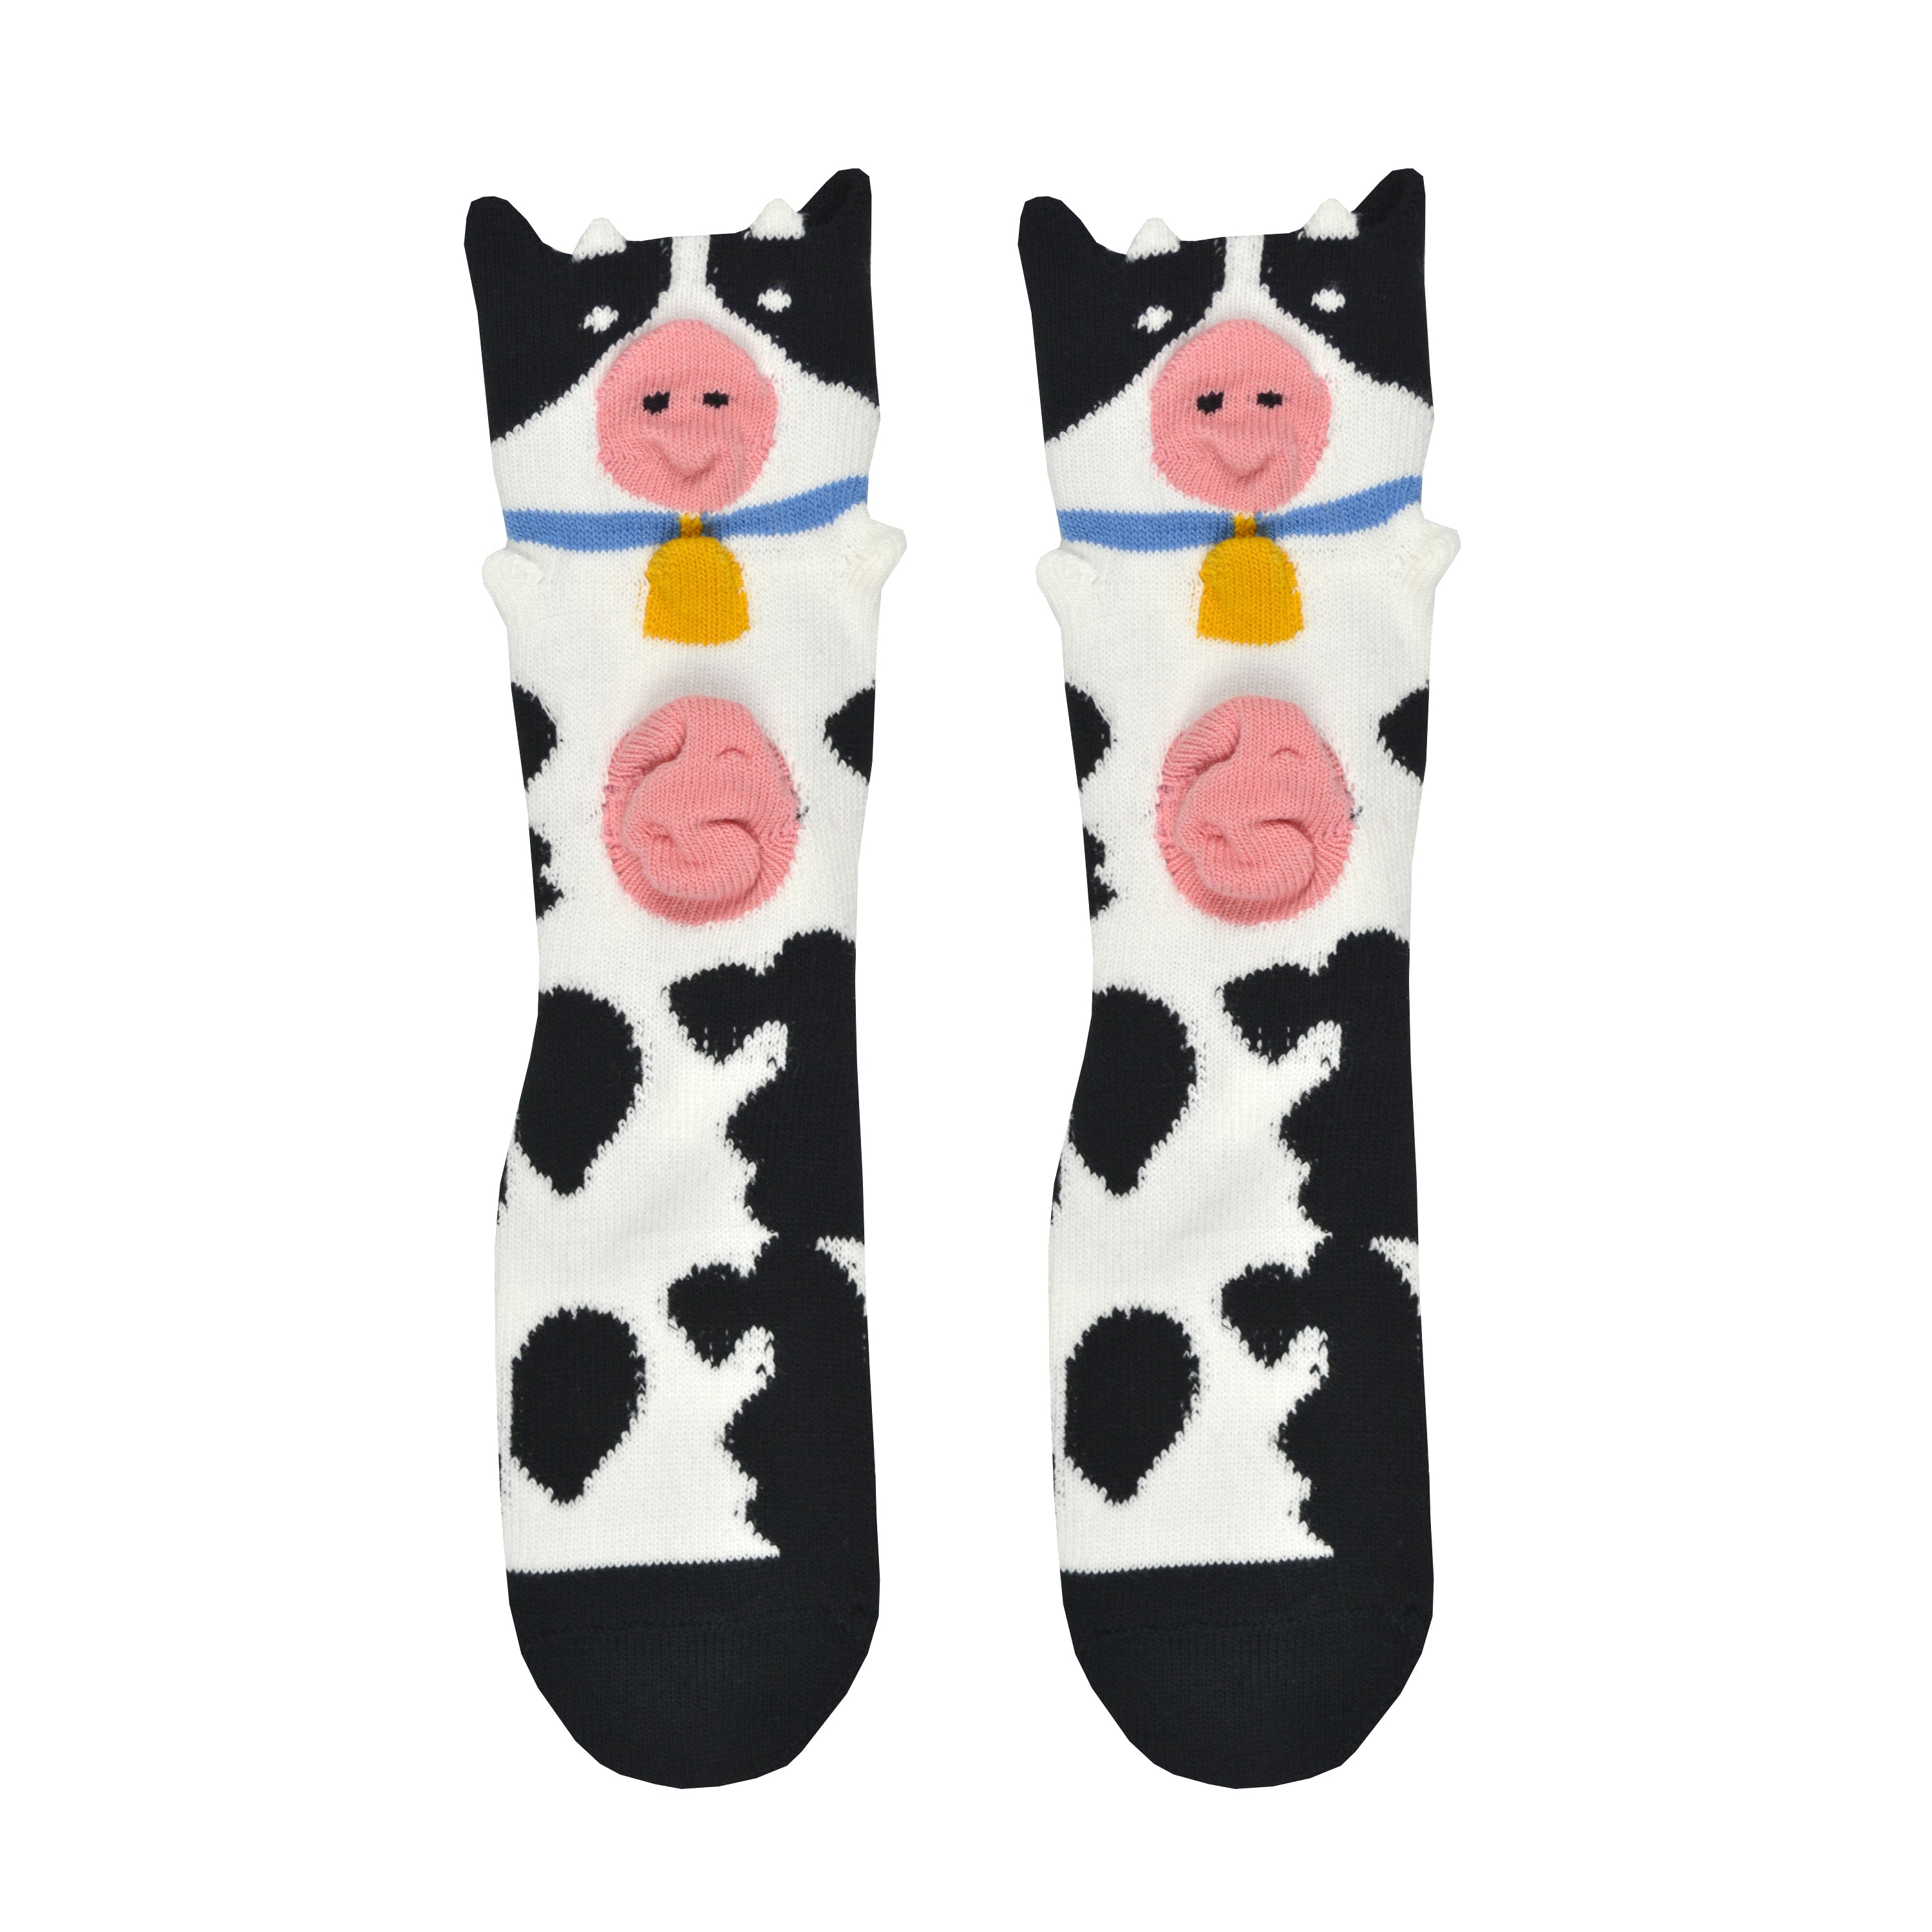 Shown in a flatlay, a pair of Foot Traffic, black and white cotton women's crew socks with three dimensional pattern of cute cow wearing a bell